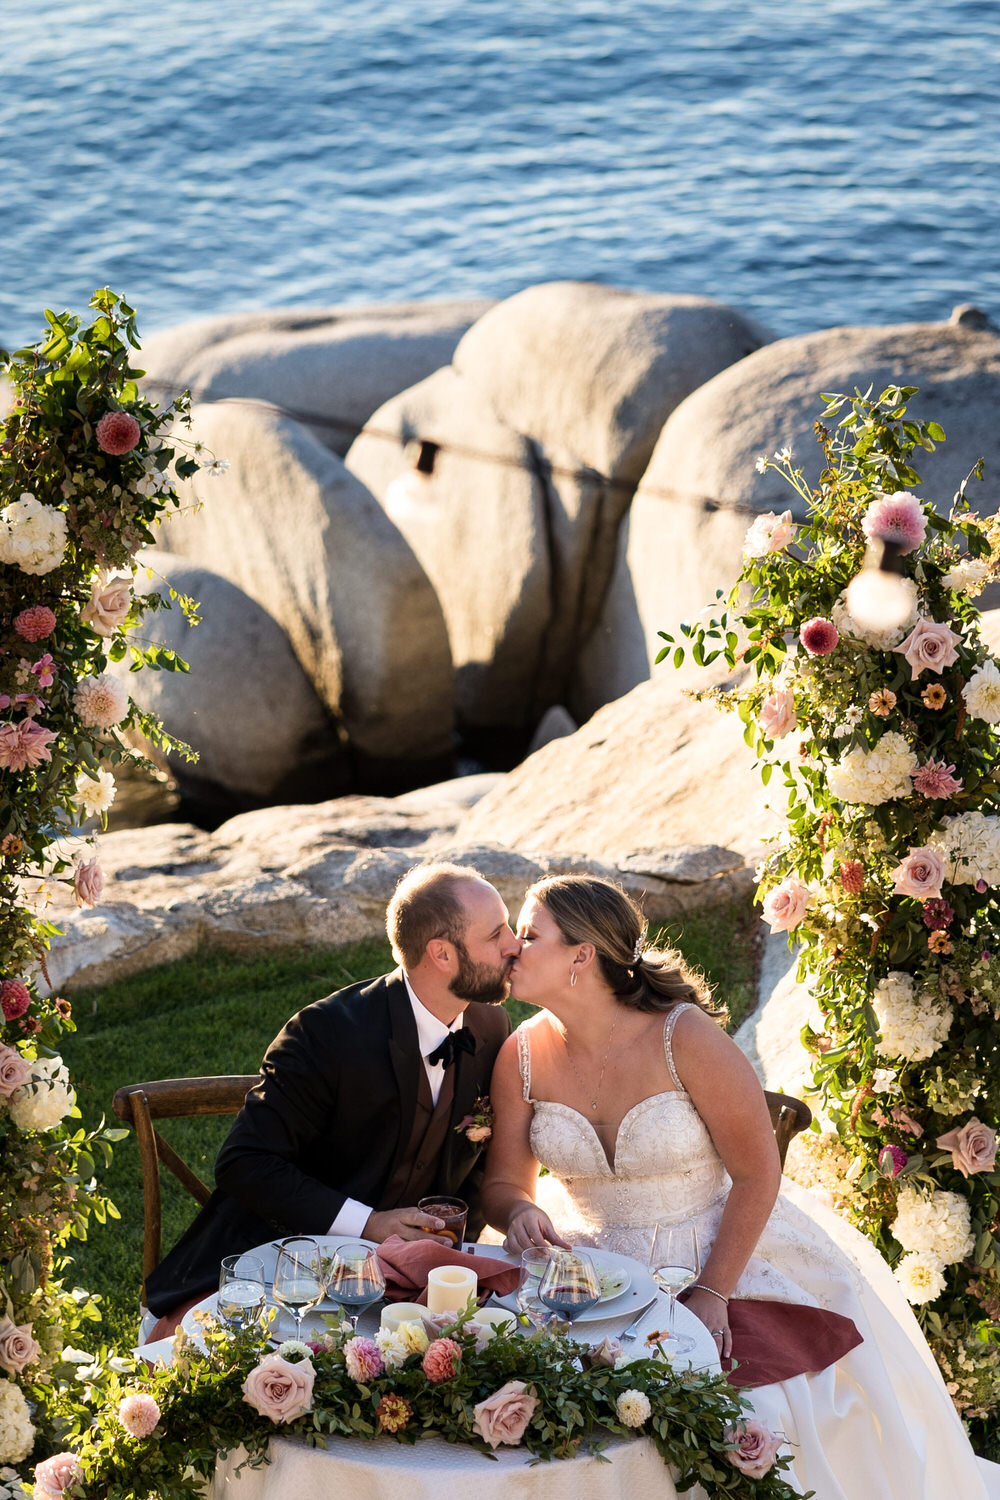 A groom kisses his bride at the sweetheart table at a Thunderbird Lodge wedding reception on the shores of Lake Tahoe.